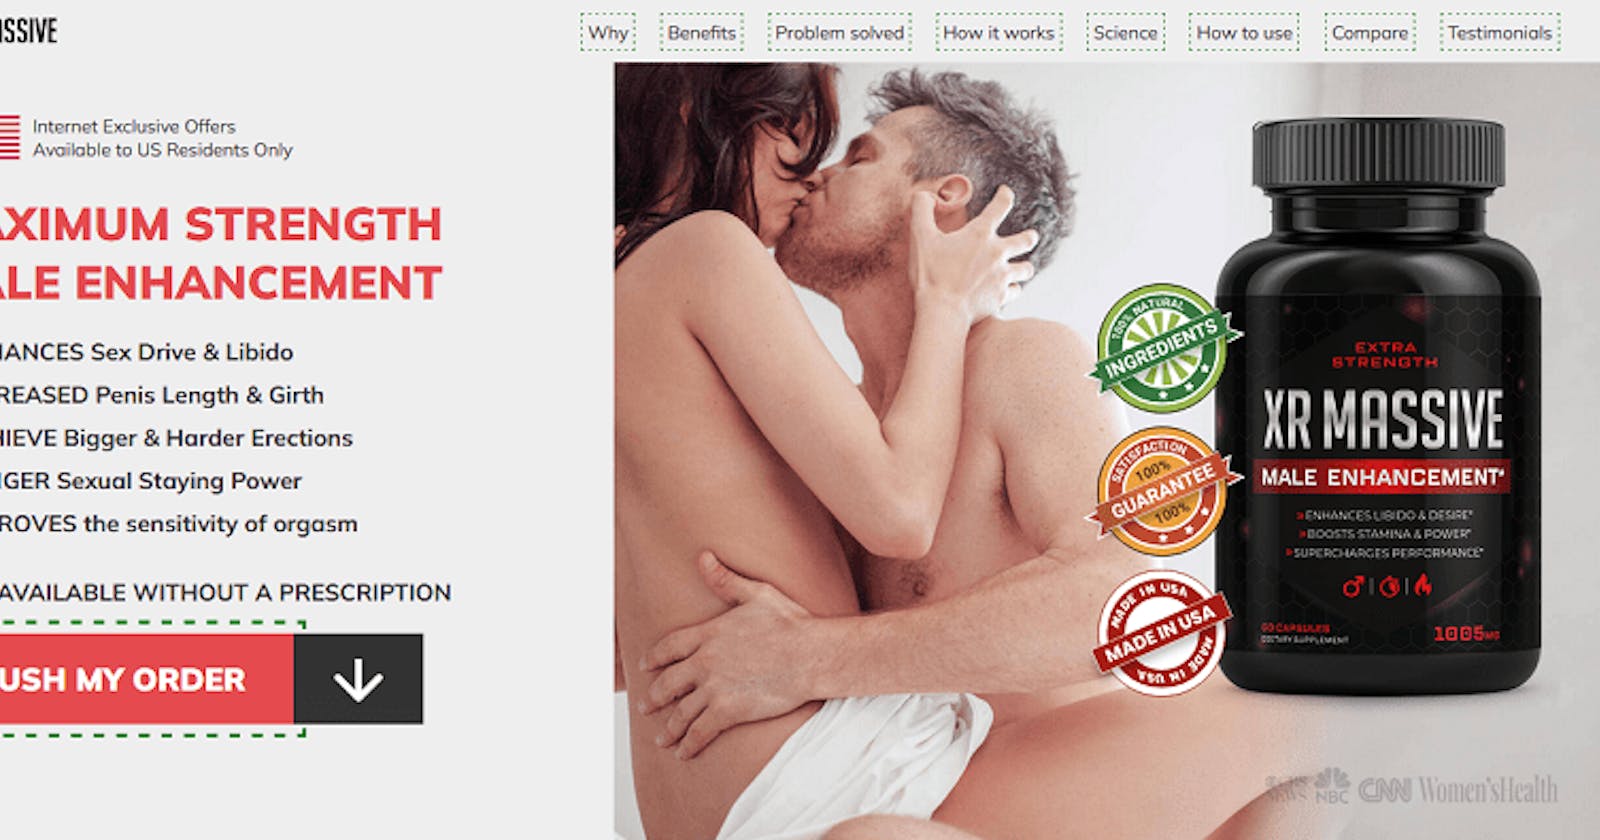 XR Massive Male Enhancement - Does It Really Works Or A Scam?